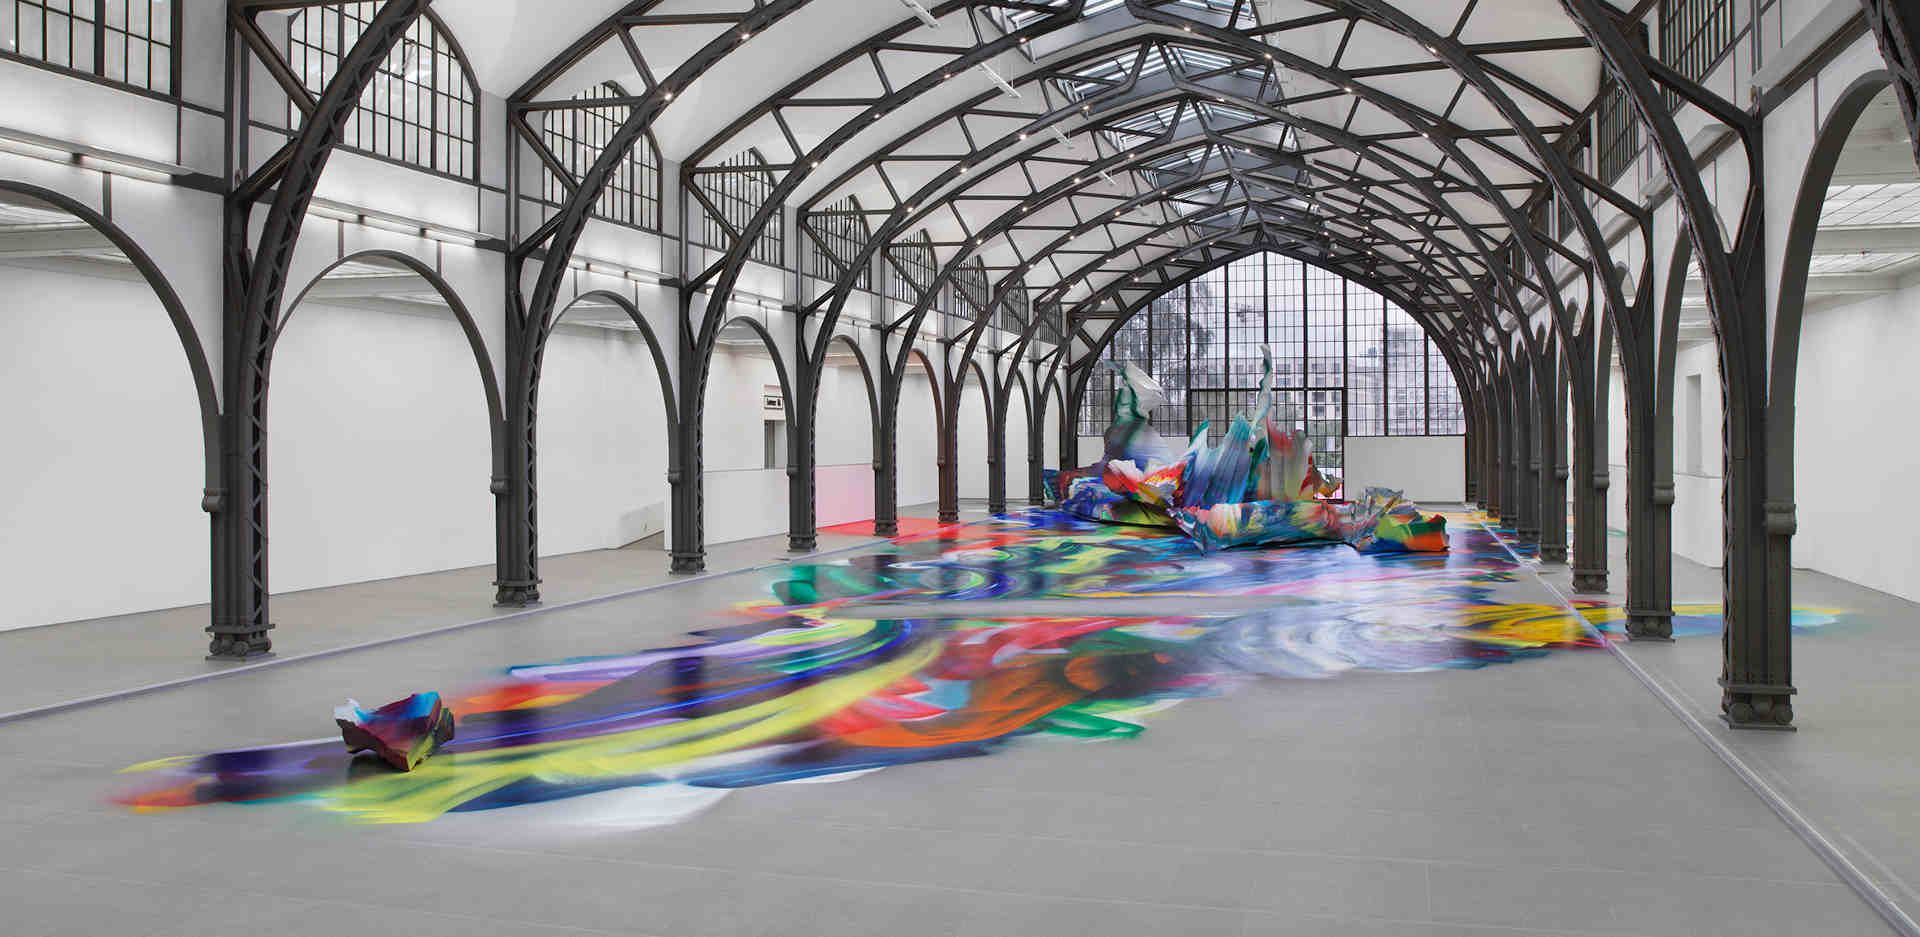 The Hamburger Bahnhof's current show is a huge painting by Katharina Grosse that covers the main hall of the museum, the courtyard and the facade of the Rieckhallen Courtesy KÖNIG GALERIE, Berlin, London, Tokyo / Gagosian / Galerie nächst St. Stephan Rosemarie Schwarzwälder, Wien © Katharina Grosse / VG Bild-Kunst, Bonn 2020 / Photo: Jens Ziehe